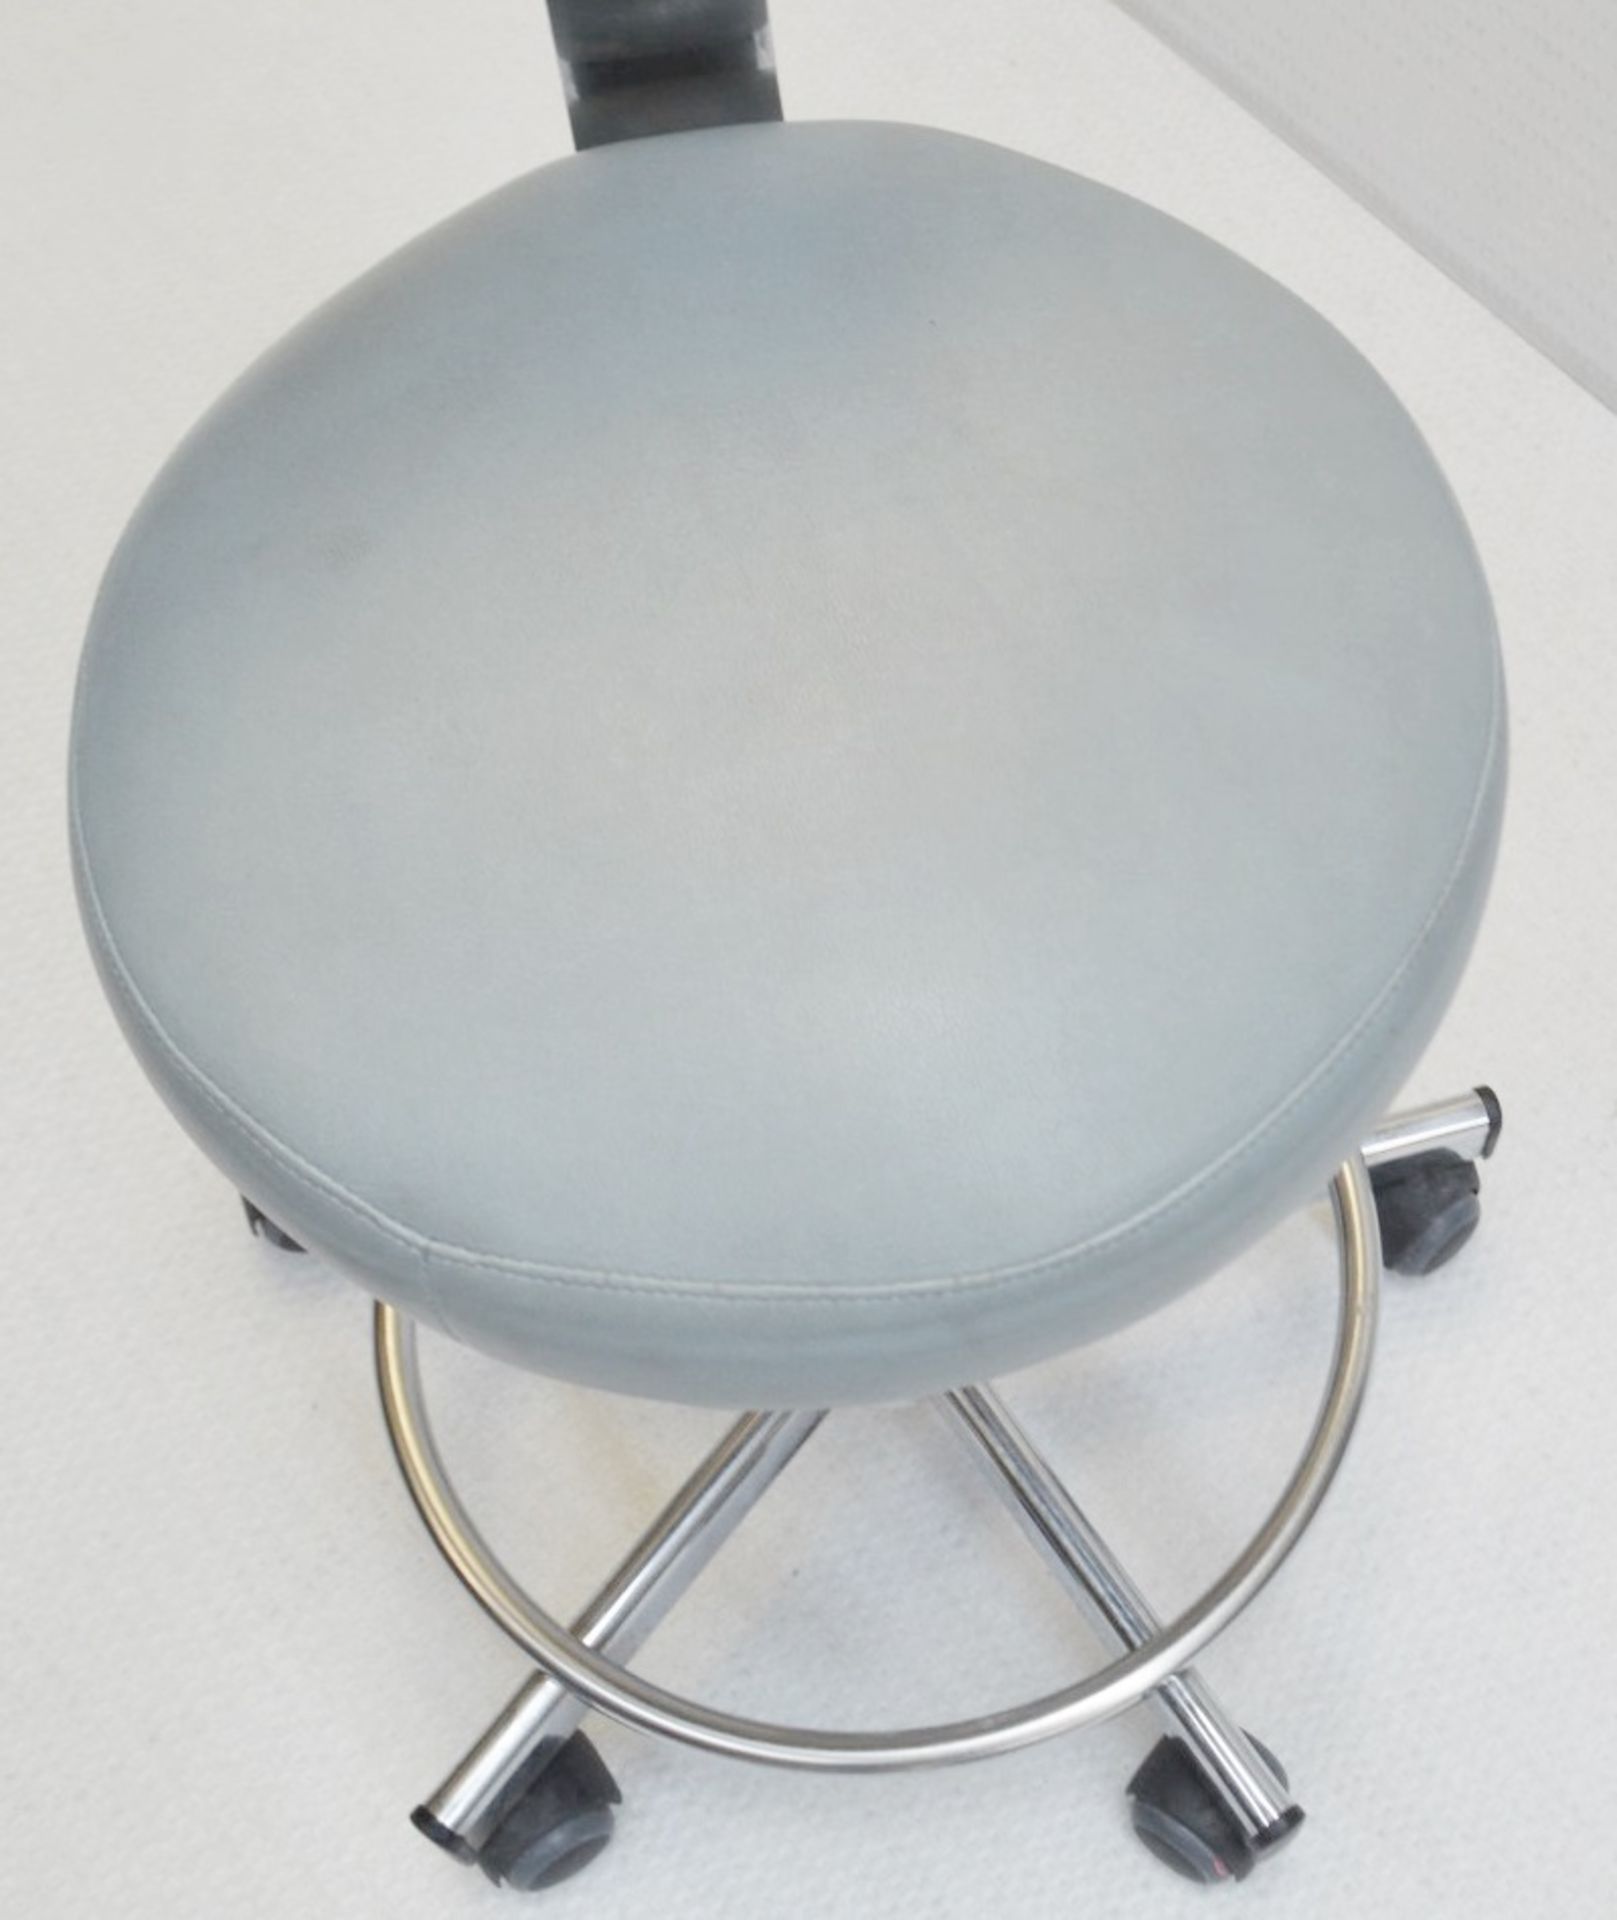 4 x Upholstered Gas Lift Treatment Stools - Dimensions: W47 x D49 x H72-85cm - Ref: MHB102 - CL670 - - Image 6 of 7